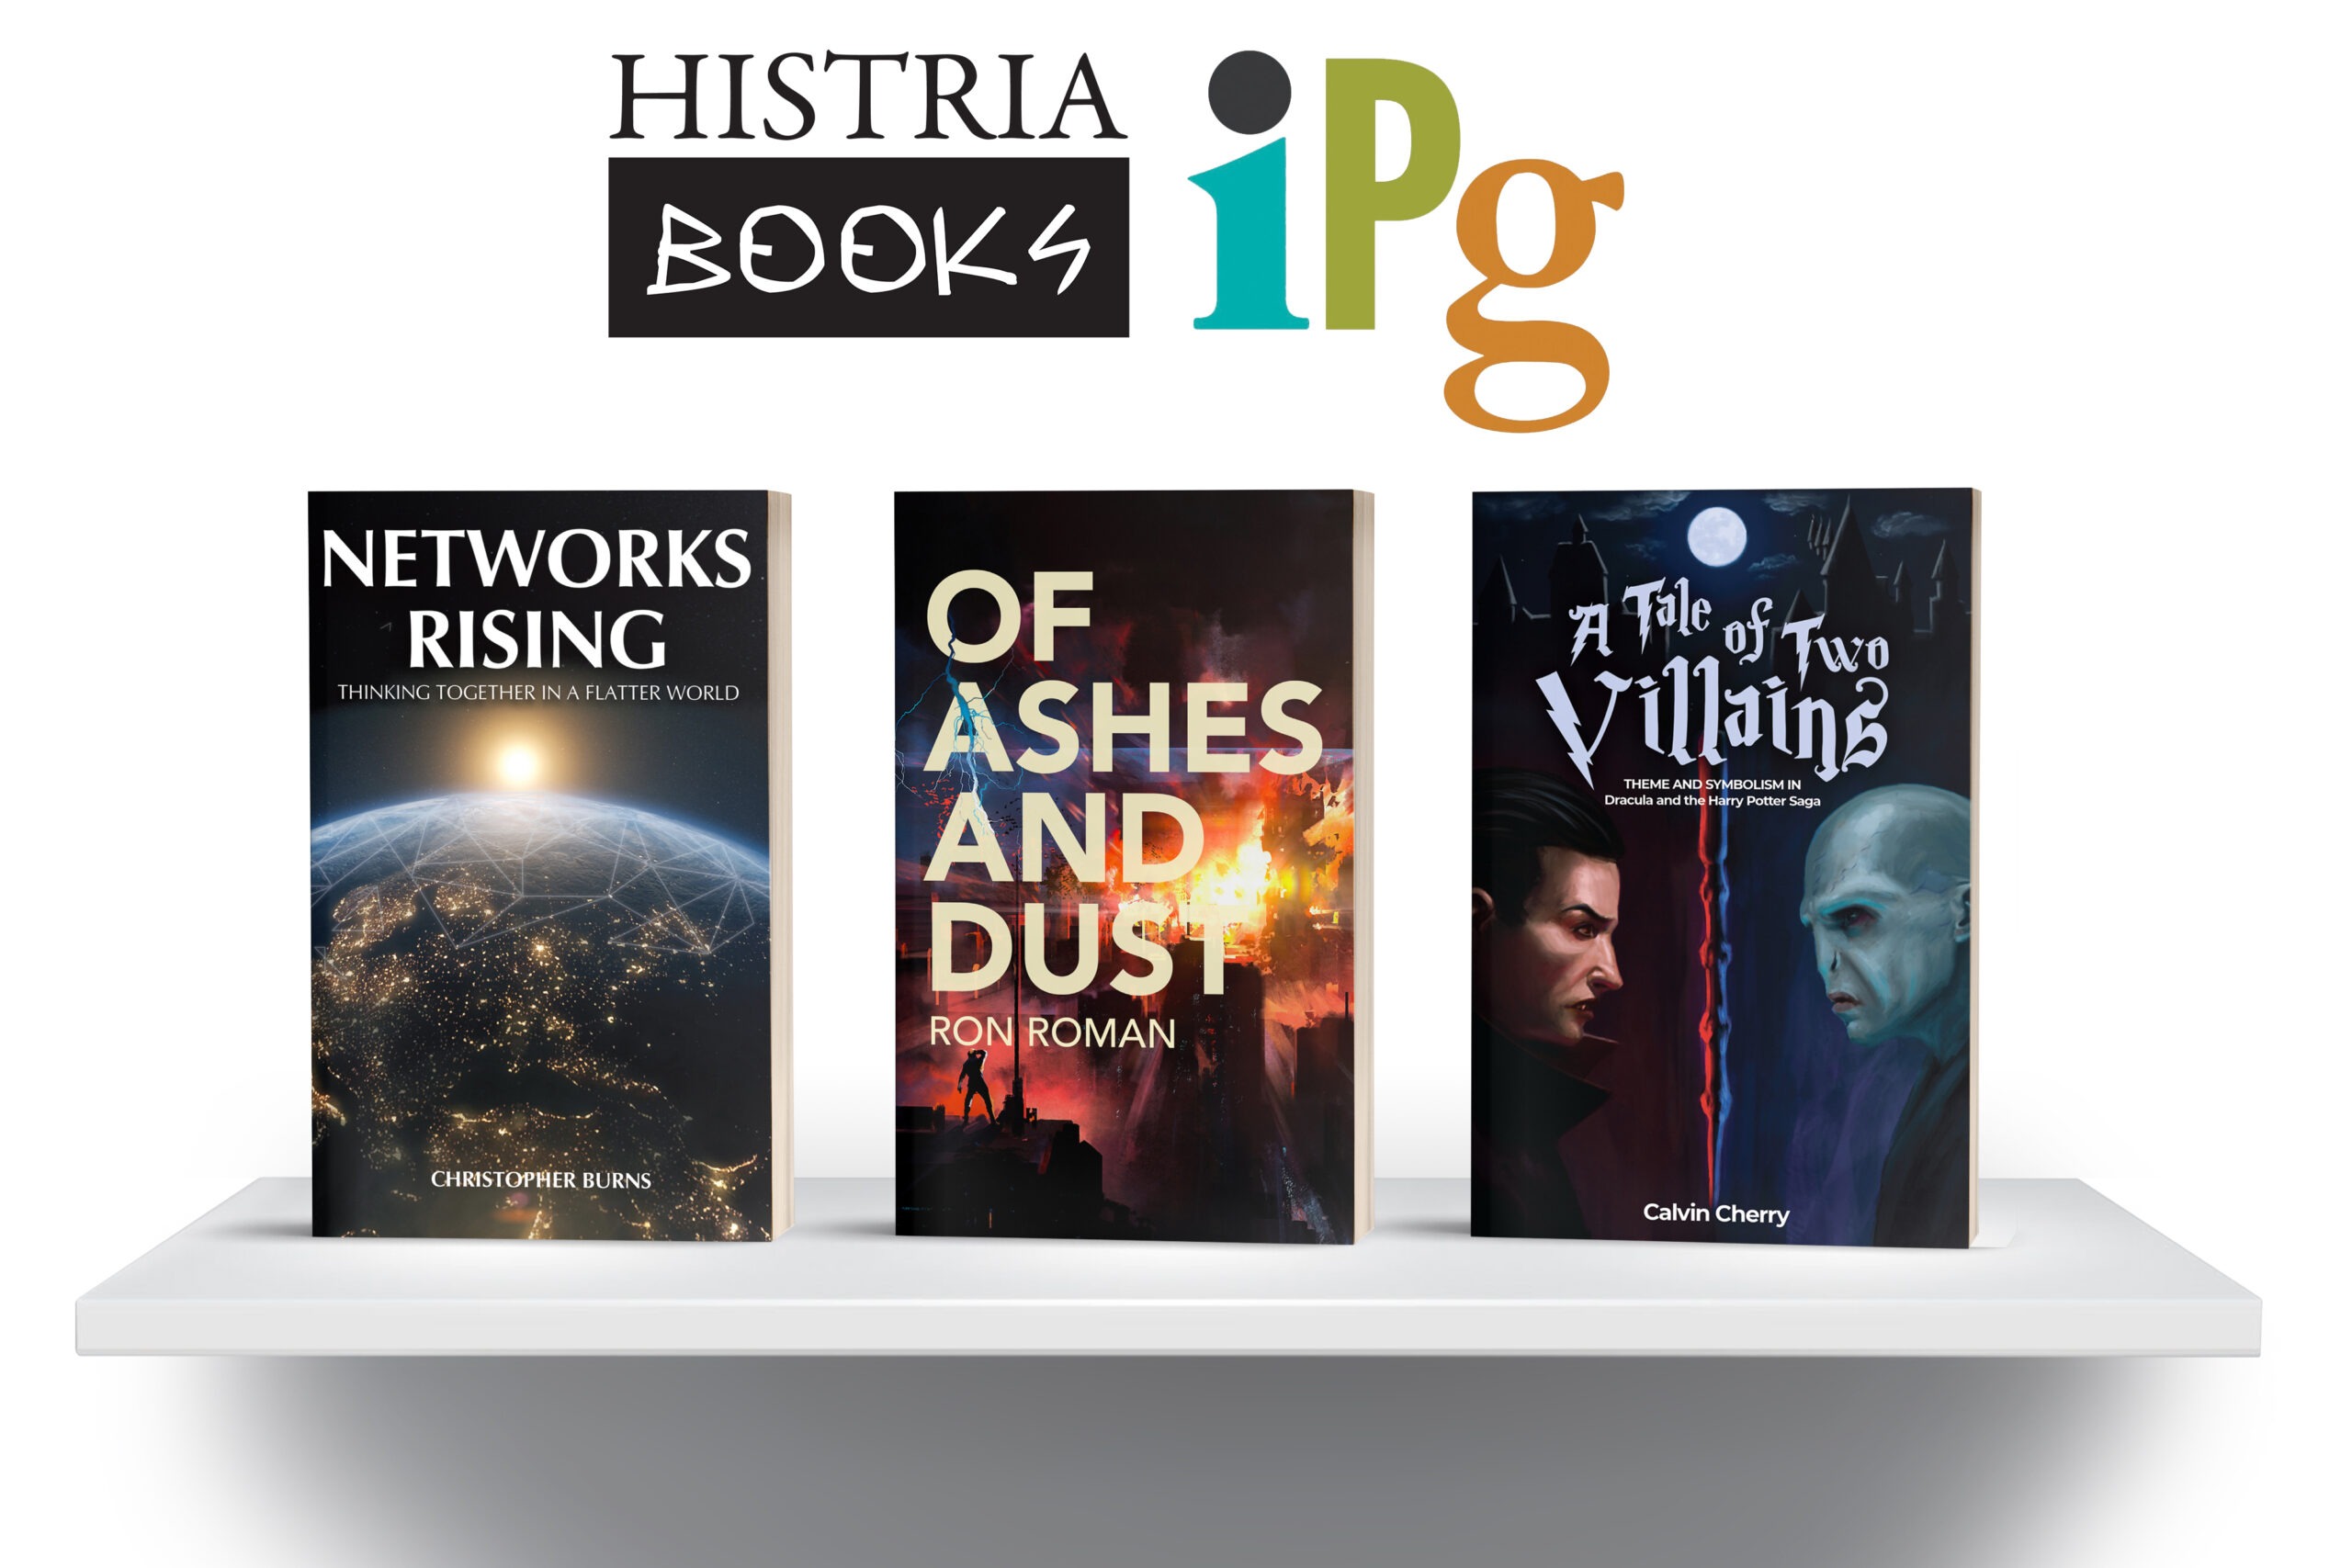 Histria Books joins the Independent Publishers Group as of July 1st